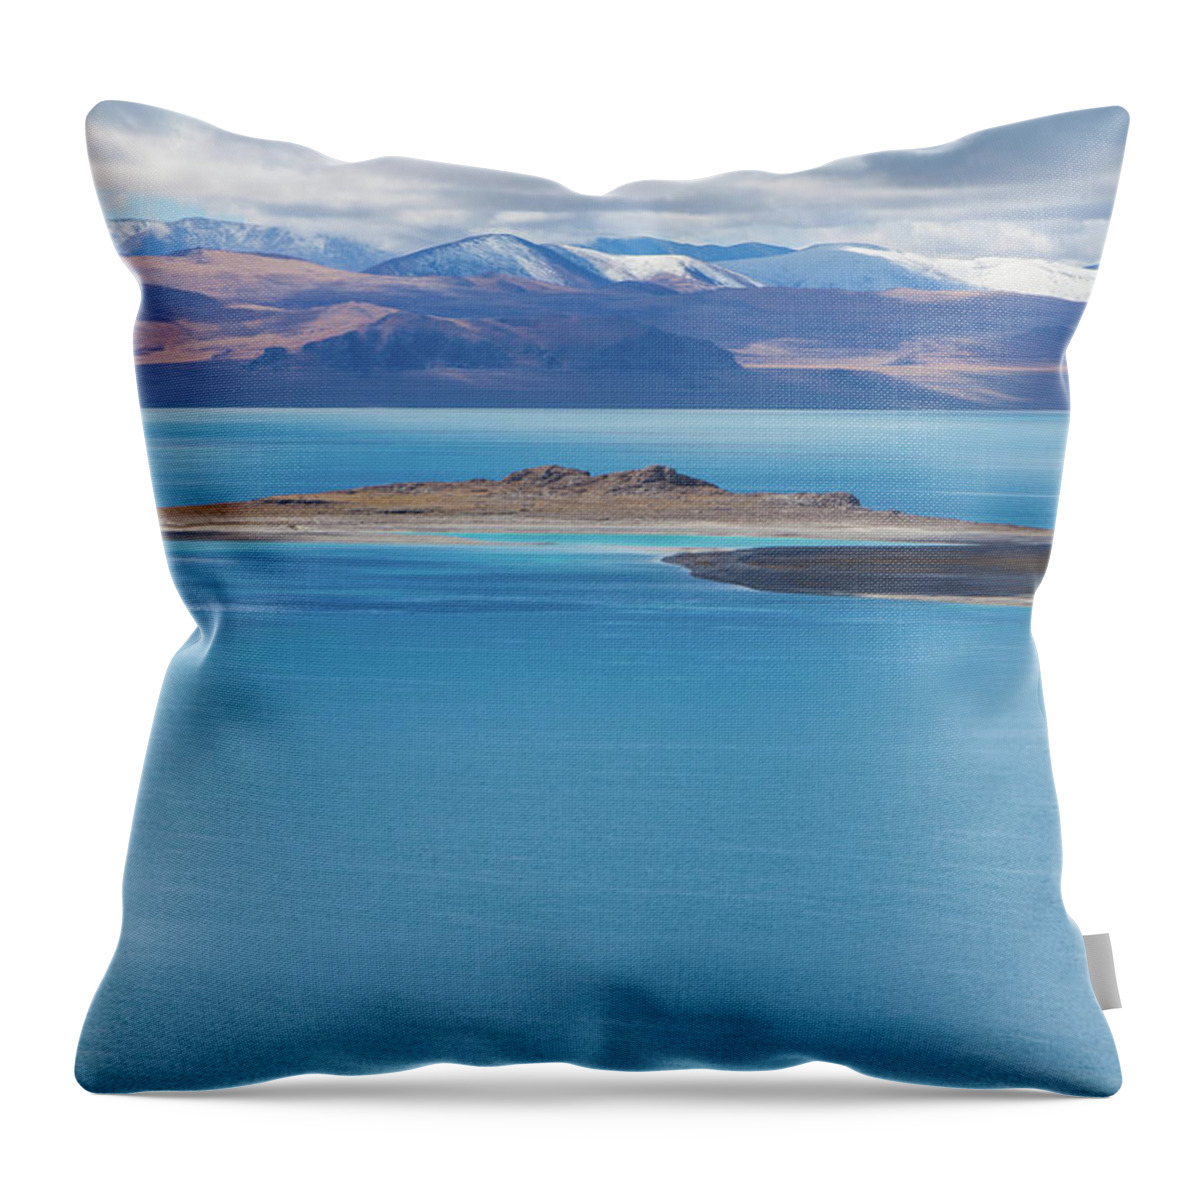 Scenics Throw Pillow featuring the photograph Blue Lake Of Tibetan Plateau by Wulingyun